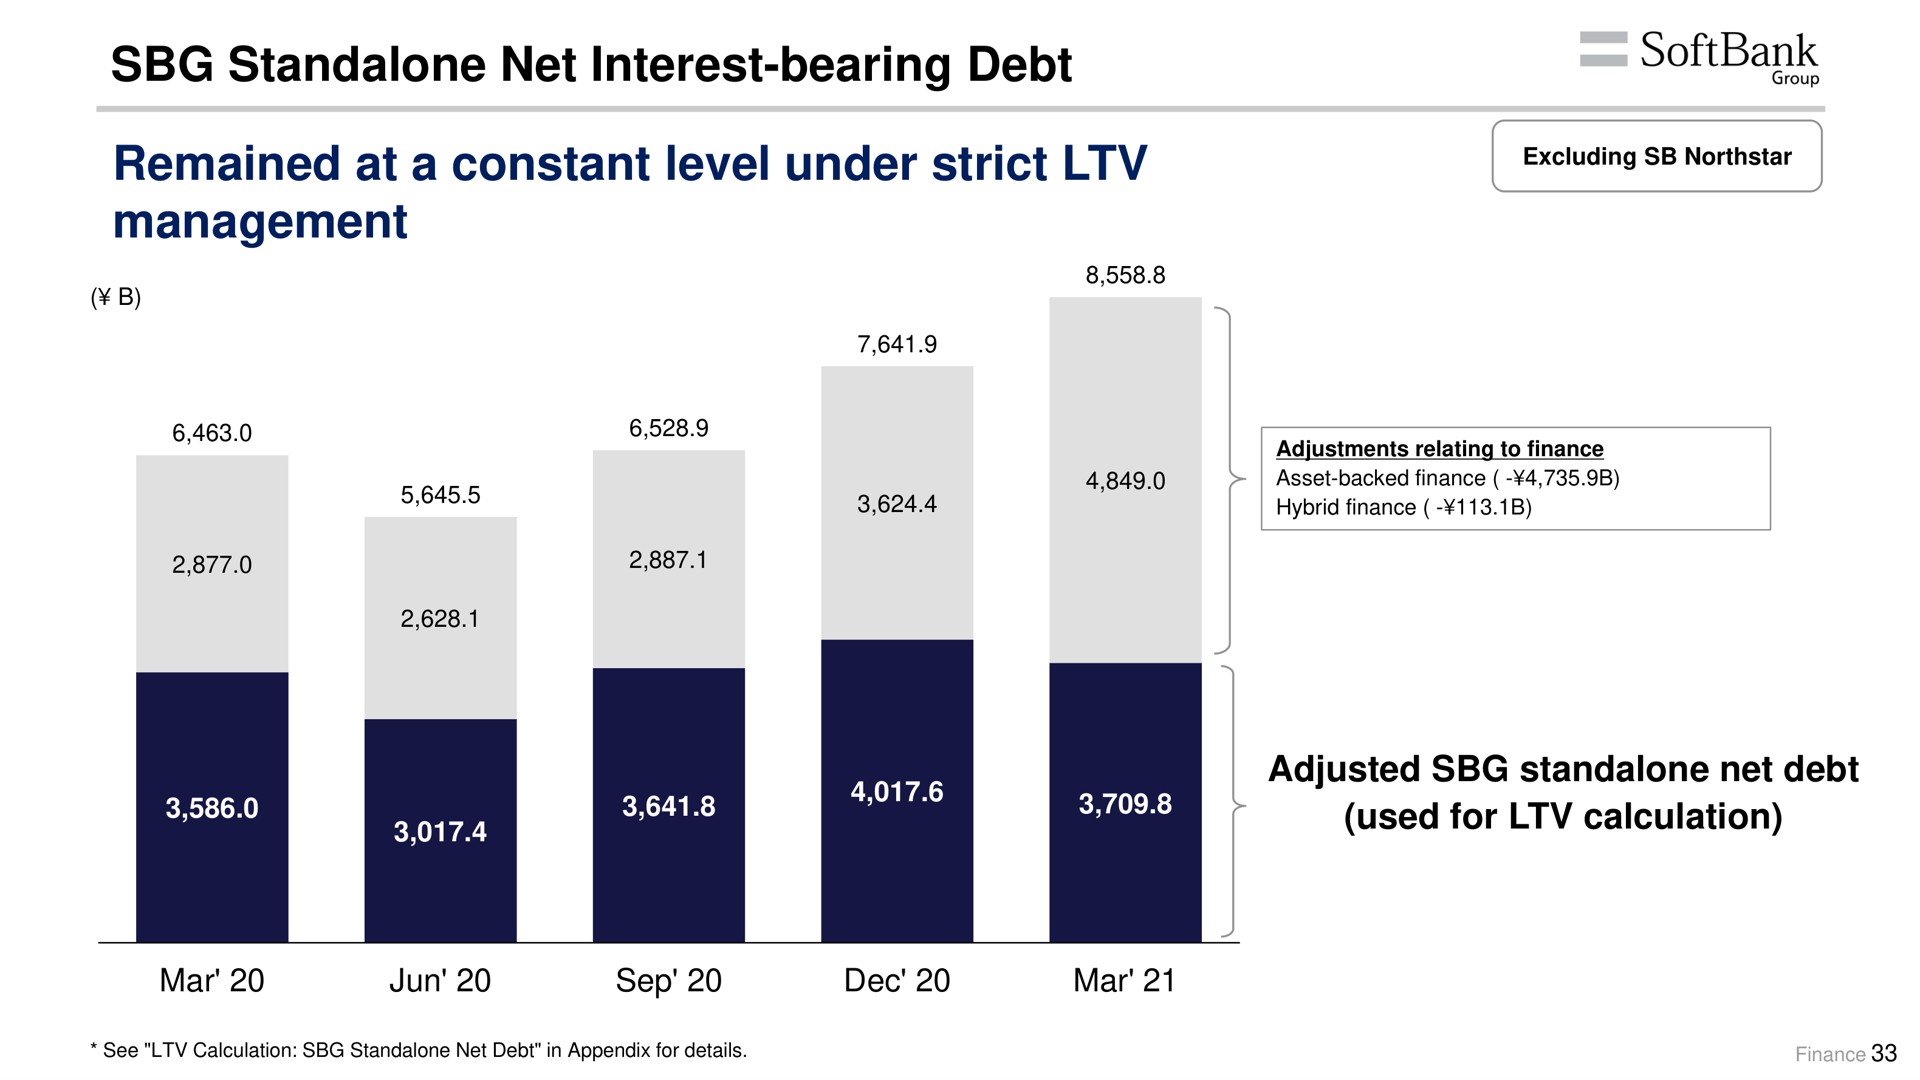 net interest bearing debt remained at a constant level under strict management | SoftBank